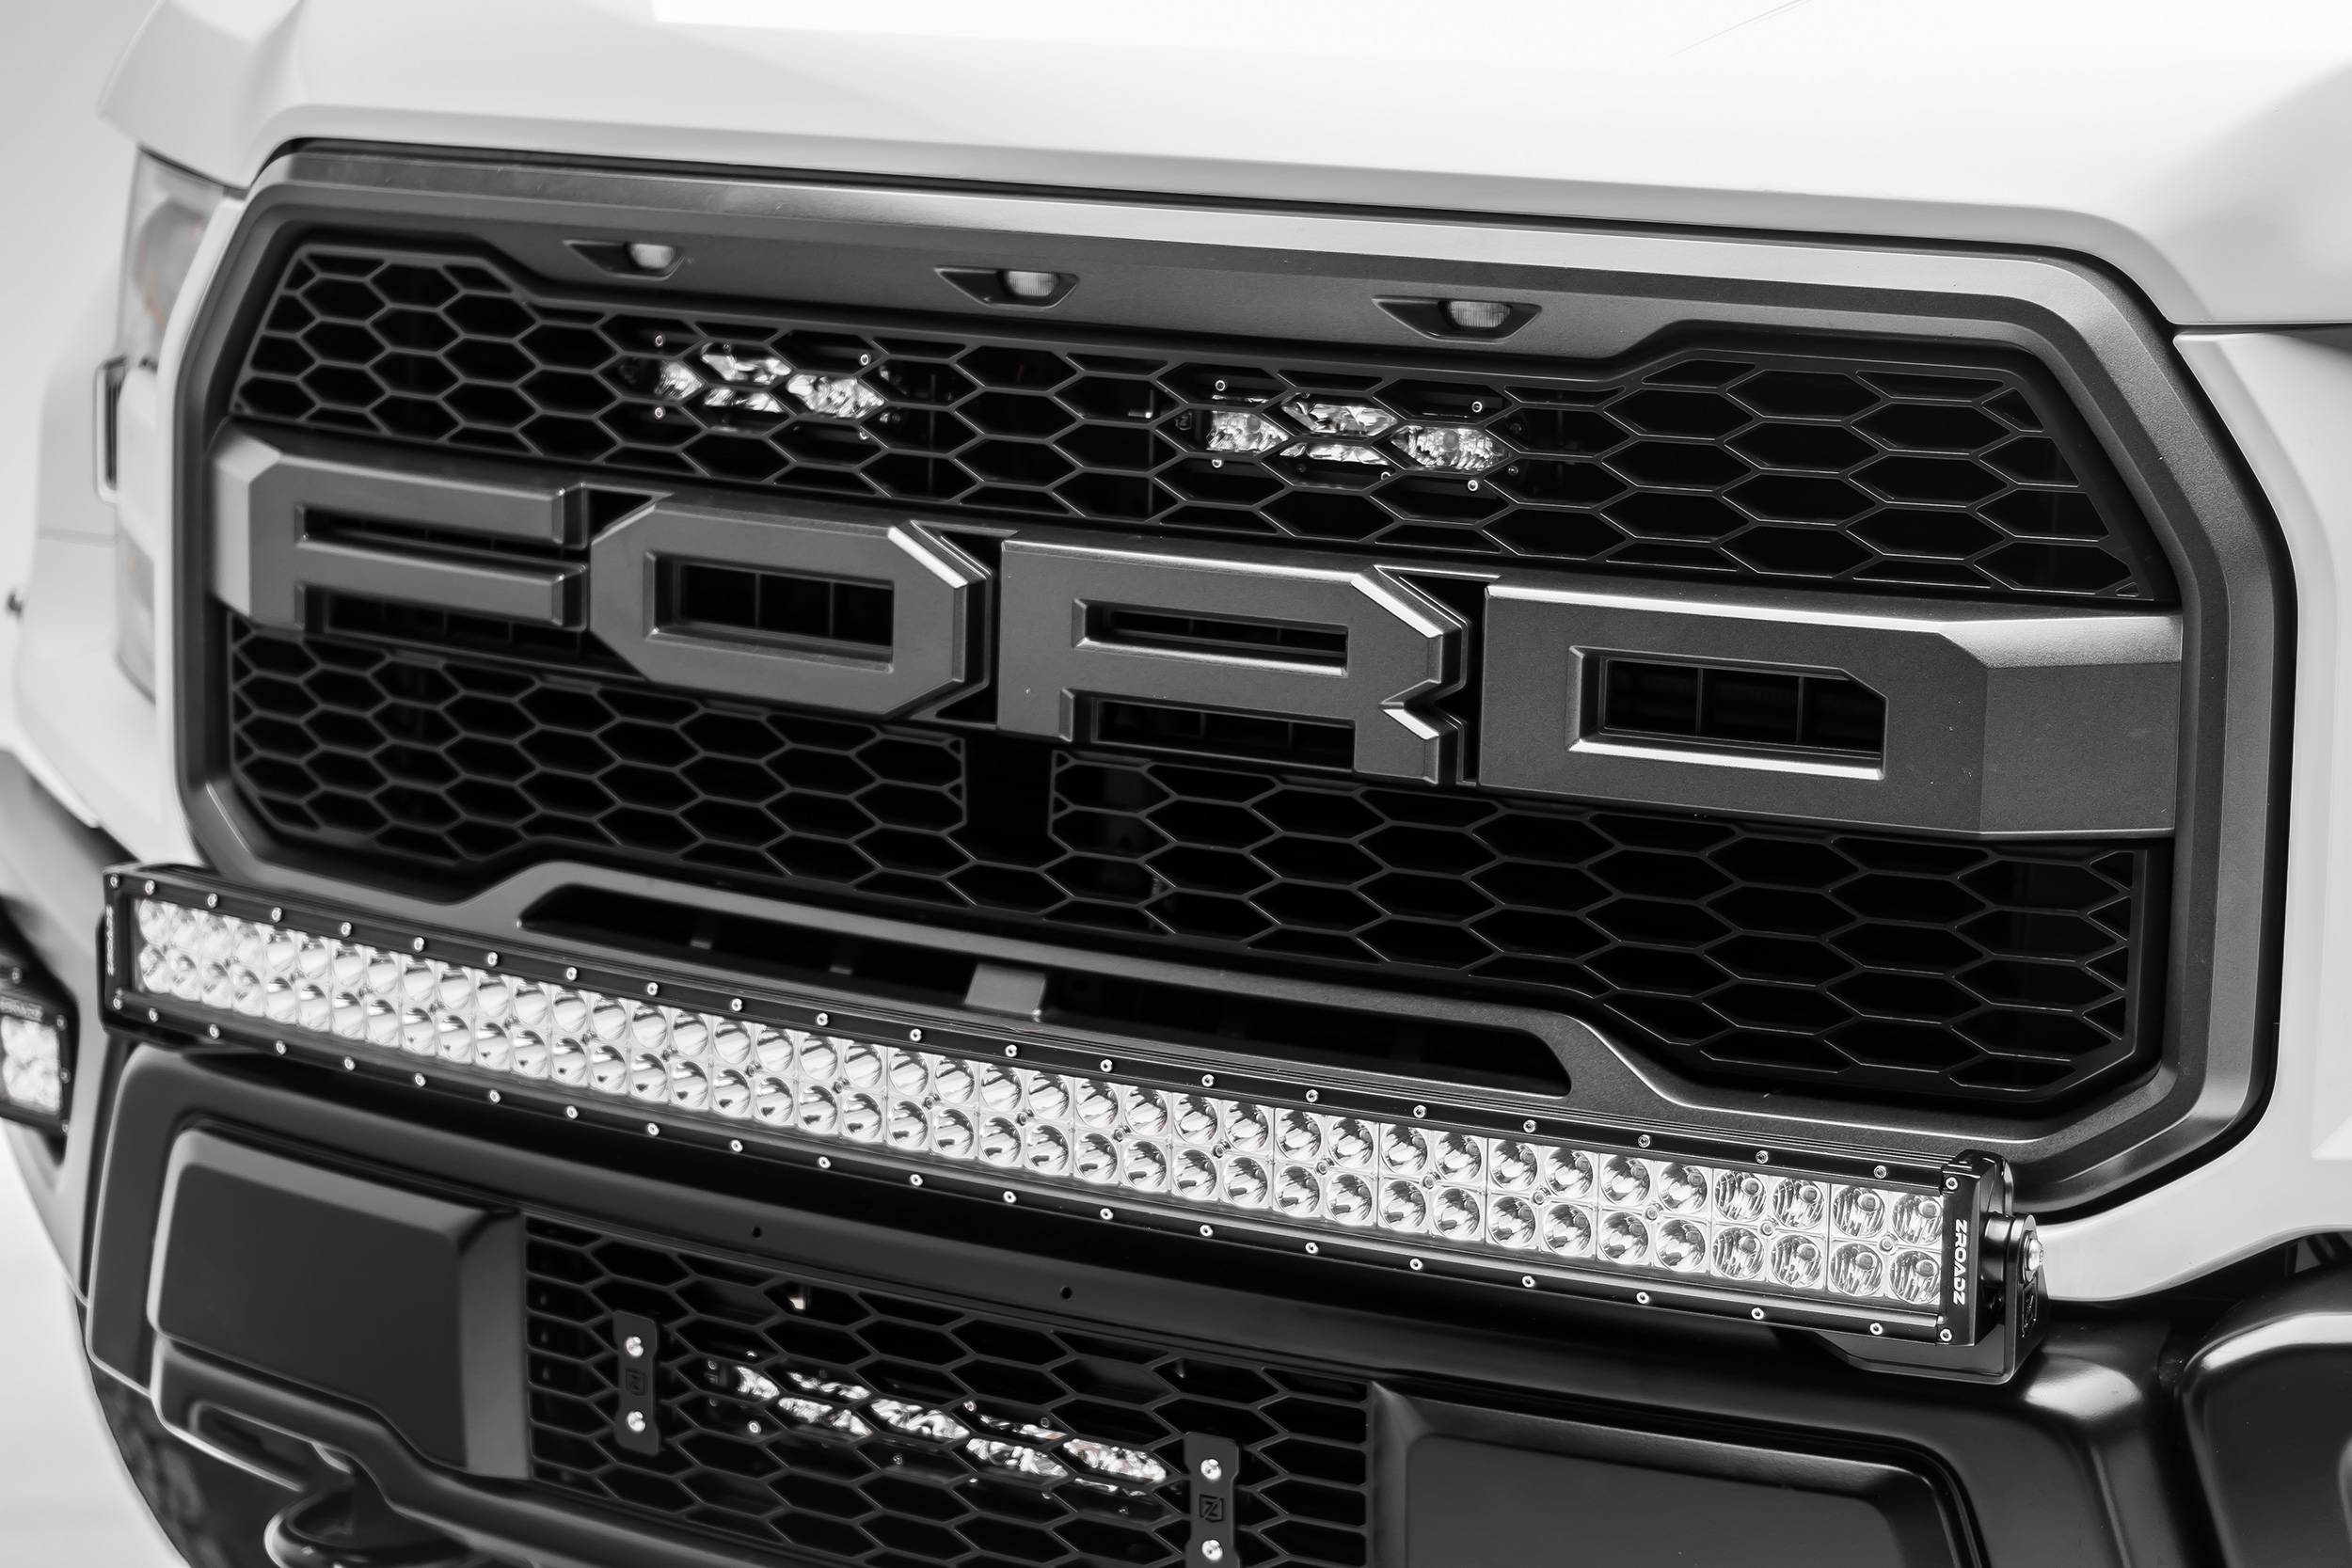 ZROADZ OFF ROAD PRODUCTS - 2017-2020 Ford F-150 Raptor OEM Grille LED Kit with (2) 6 Inch LED Straight Single Row Slim Light Bars - Part # Z415651-KIT